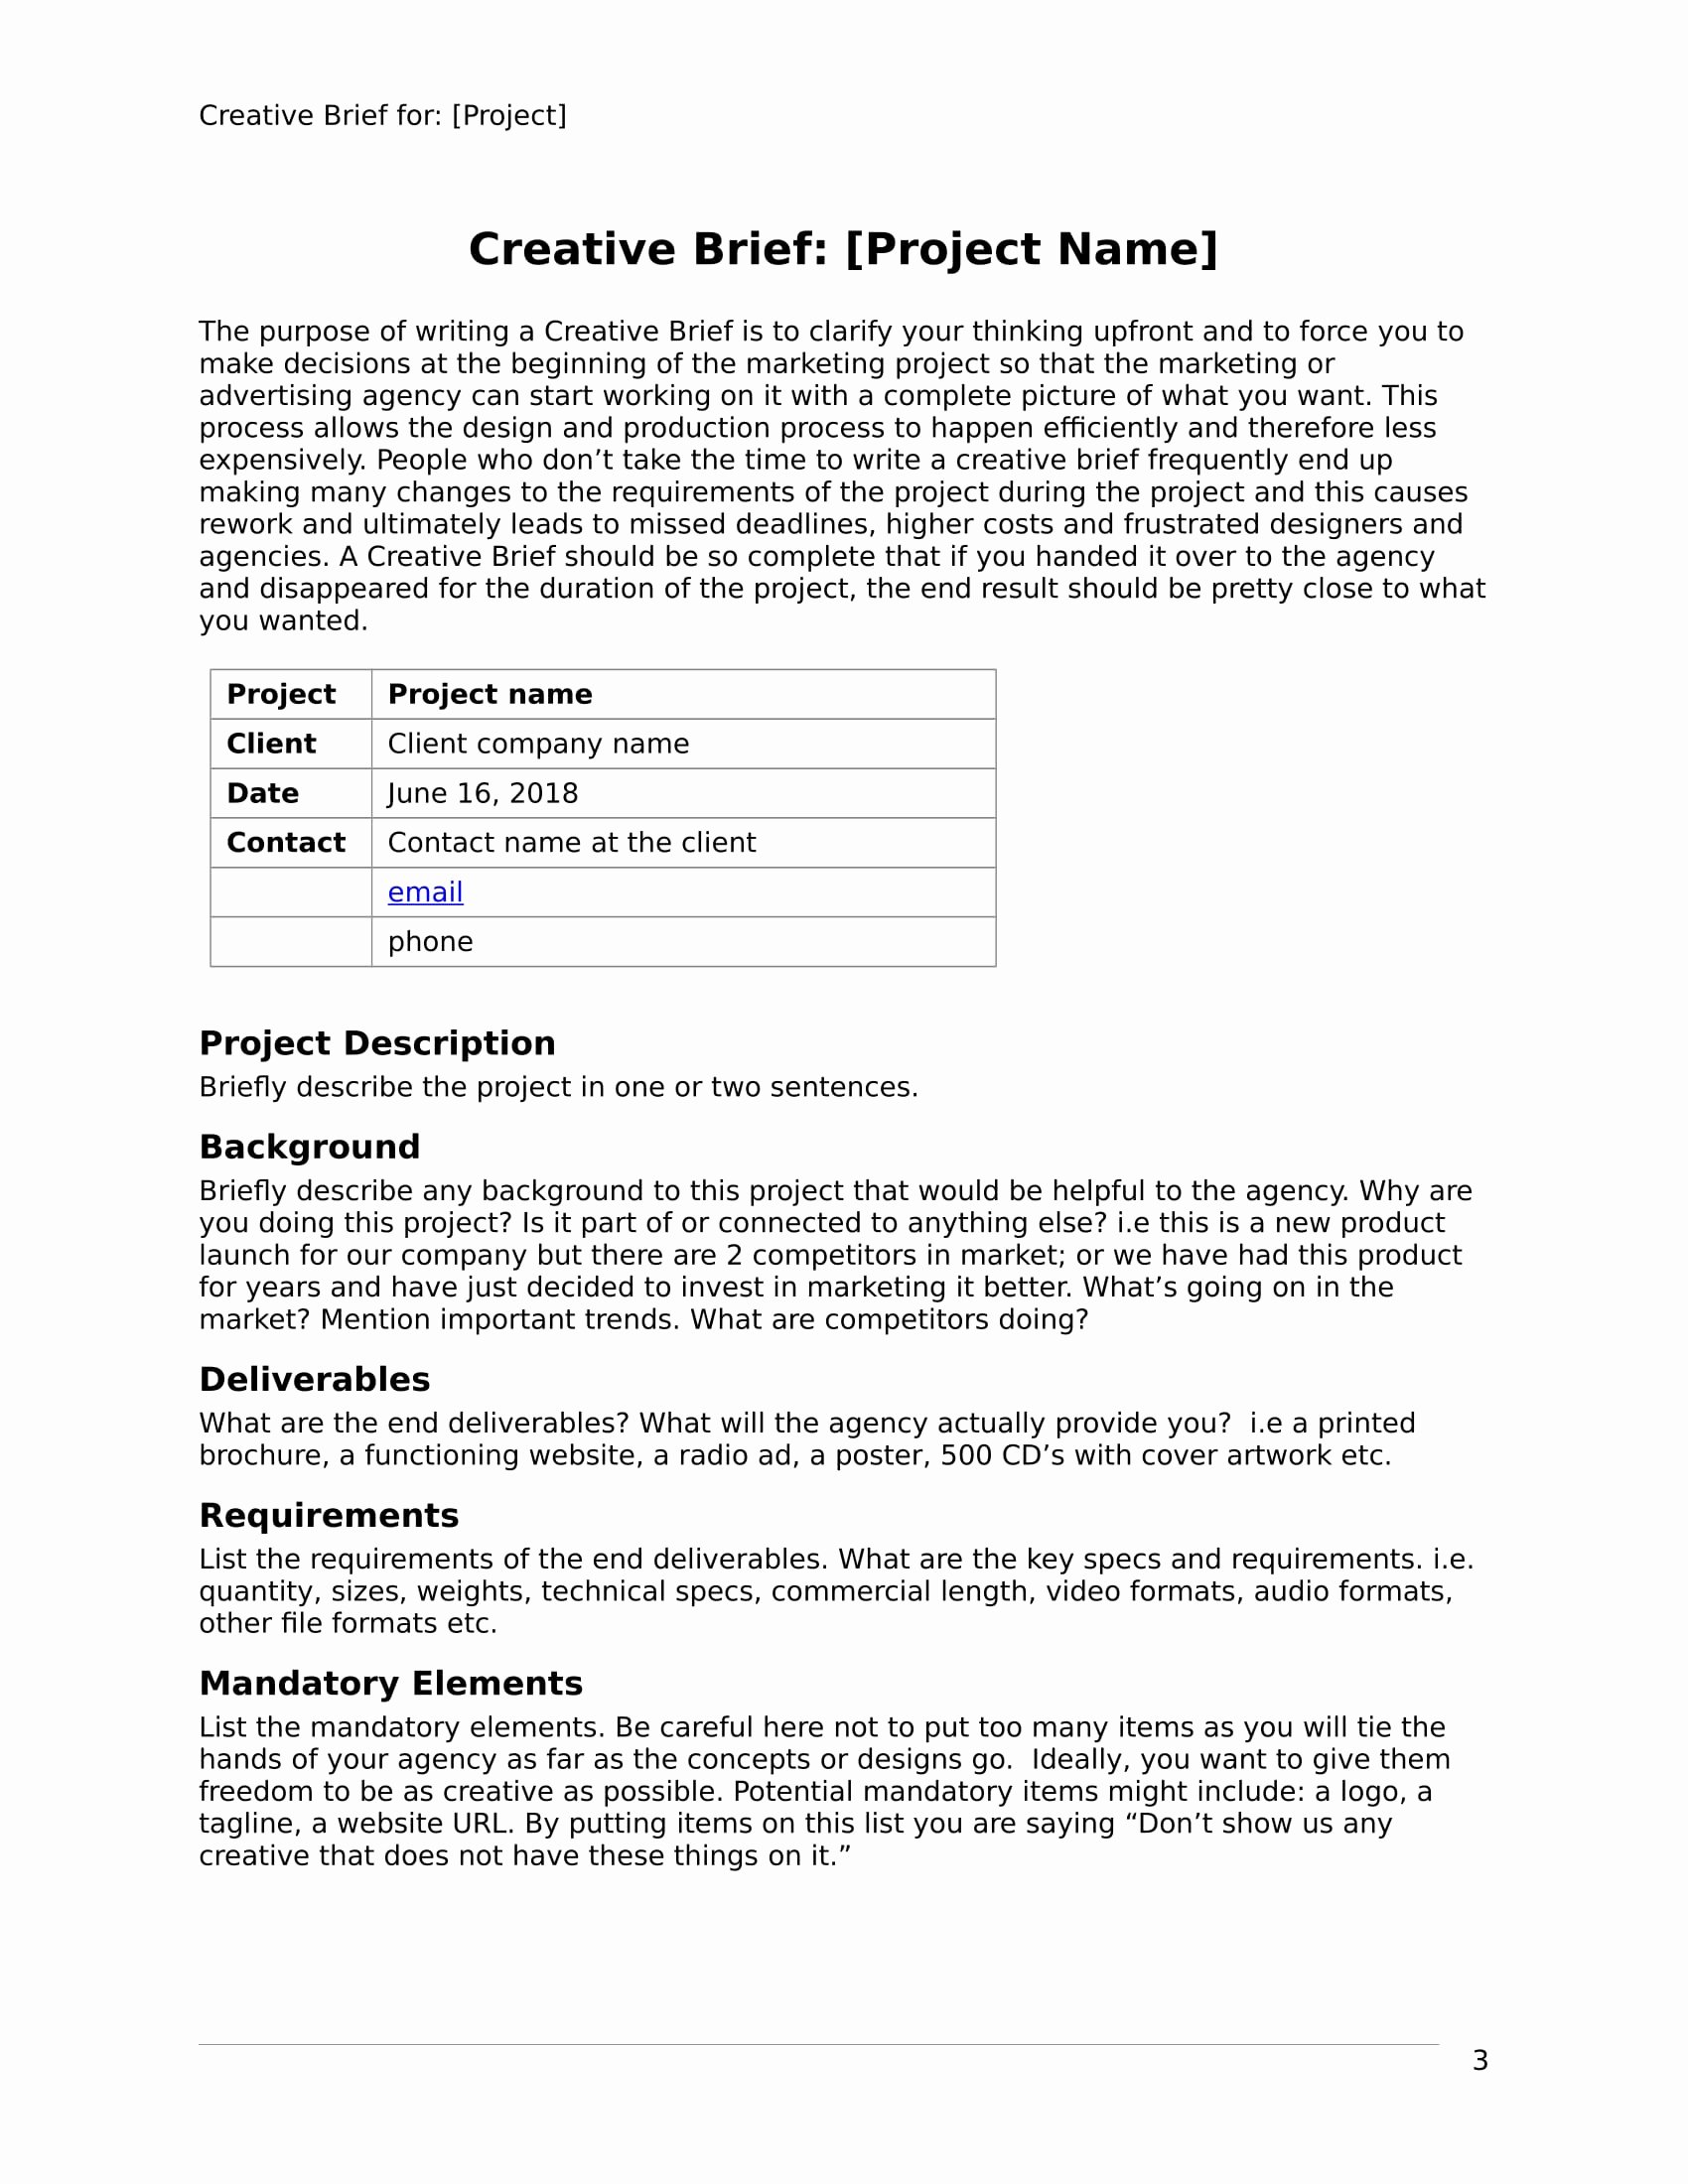 Creative Brief Sample Pdf Lovely 32 Free Creative Brief Templates and Examples Pdf Doc